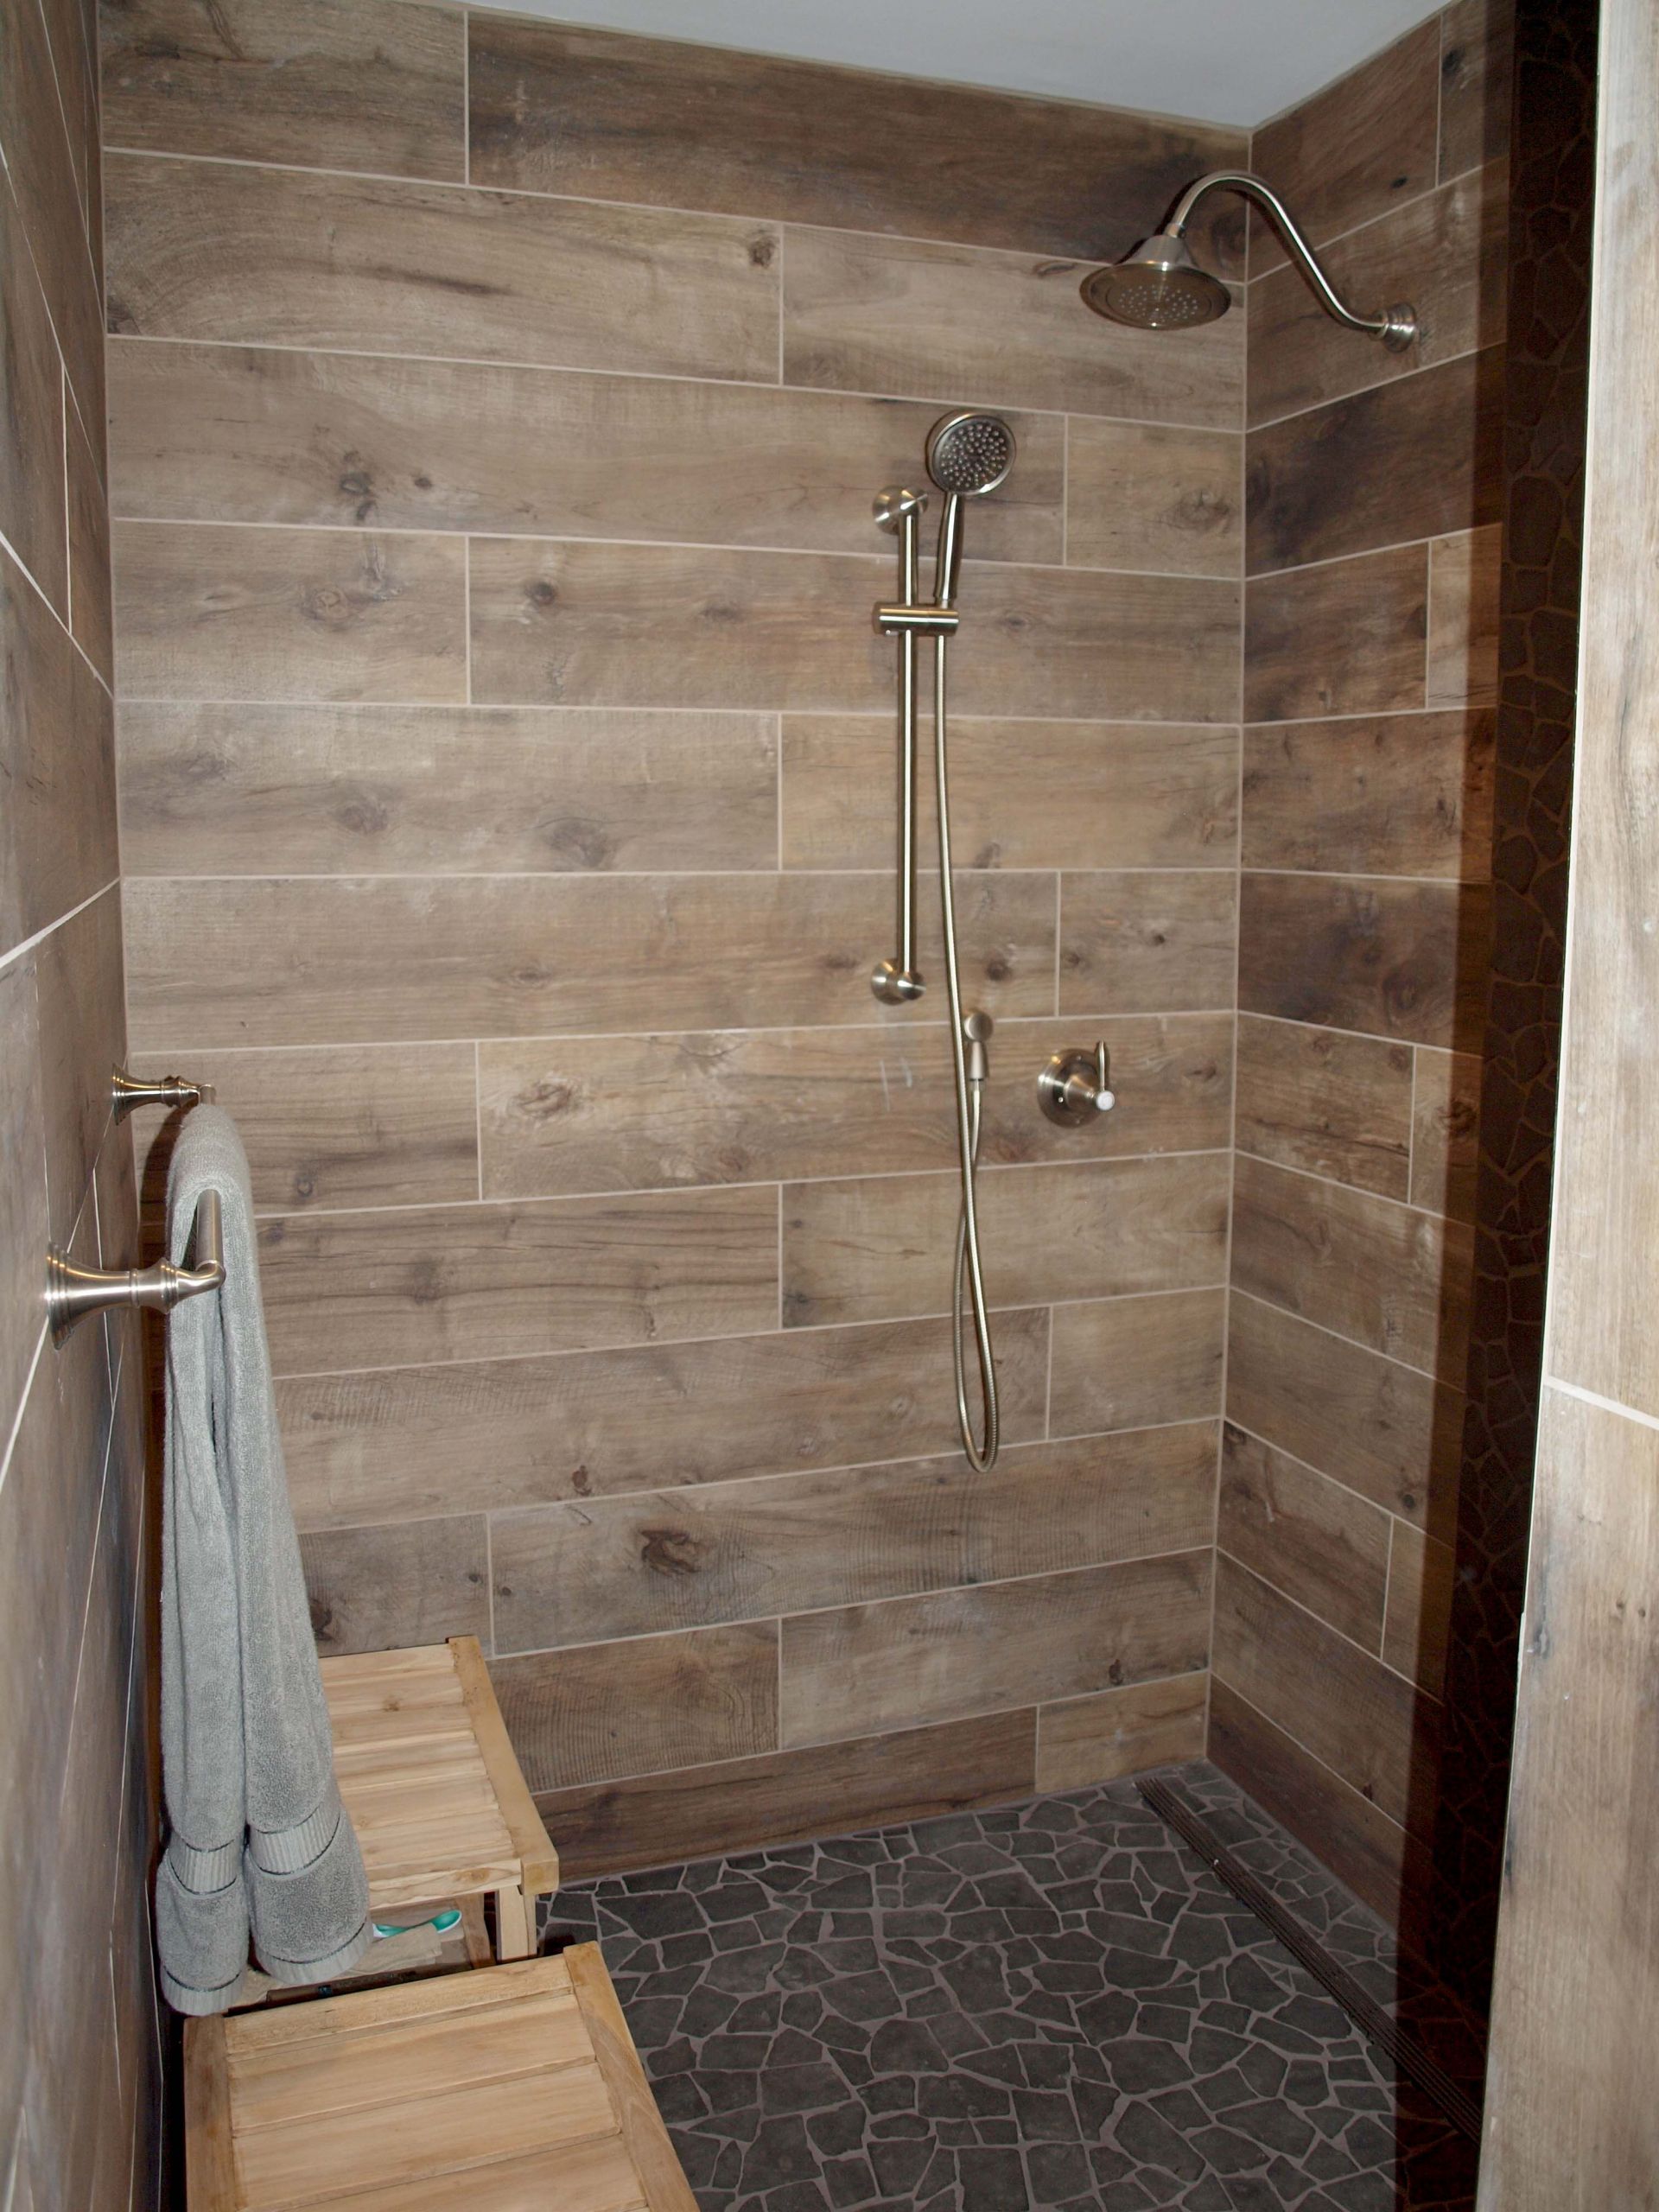 Wood Tile In Bathrooms
 Wood tile in the shower Normandy Remodeling